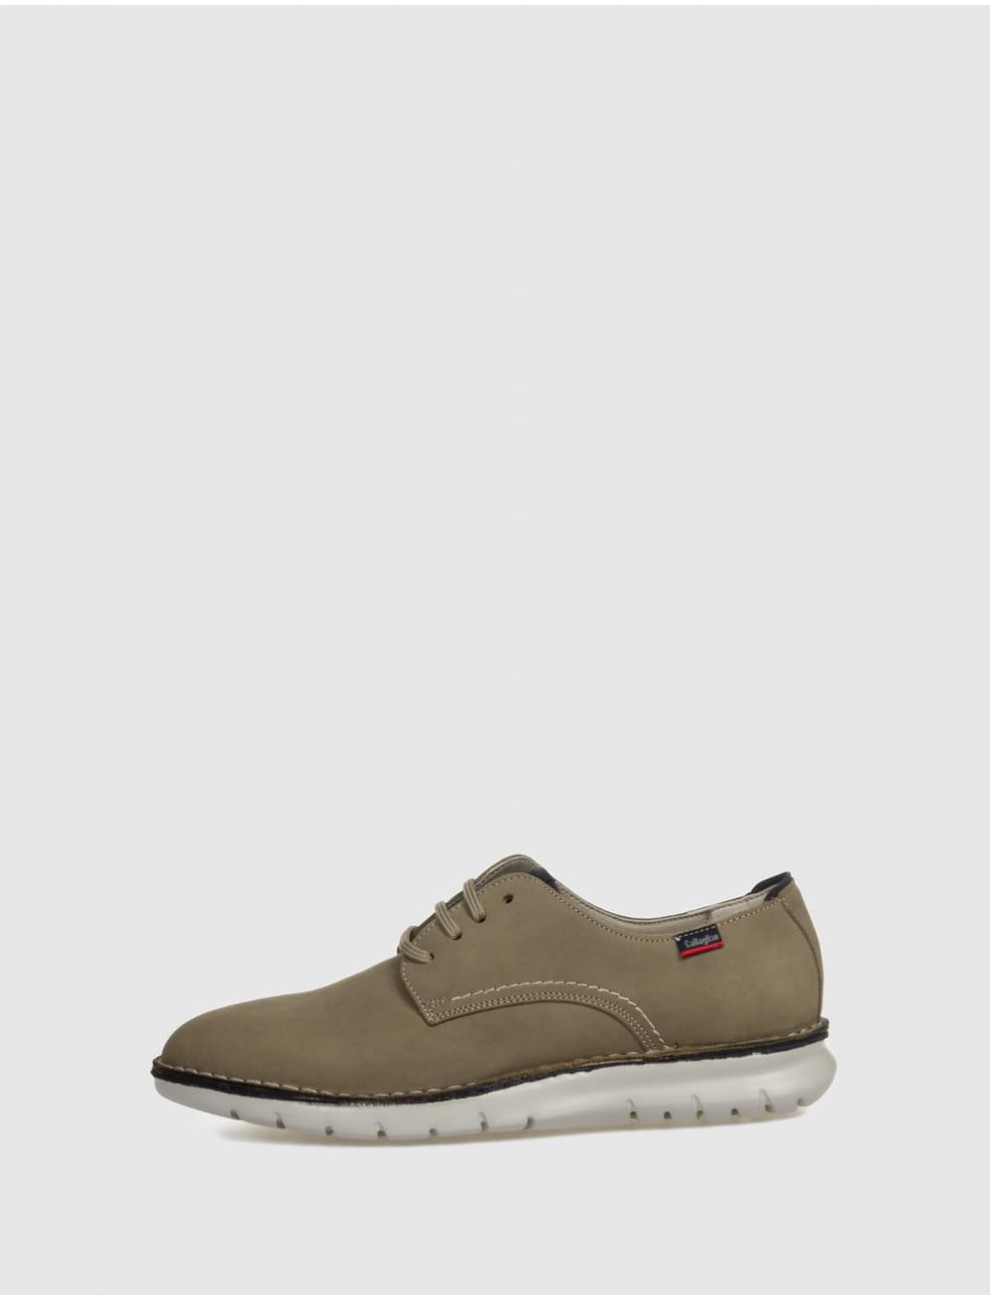 ZAPATO CALLAGHAN 47105 TAUPE